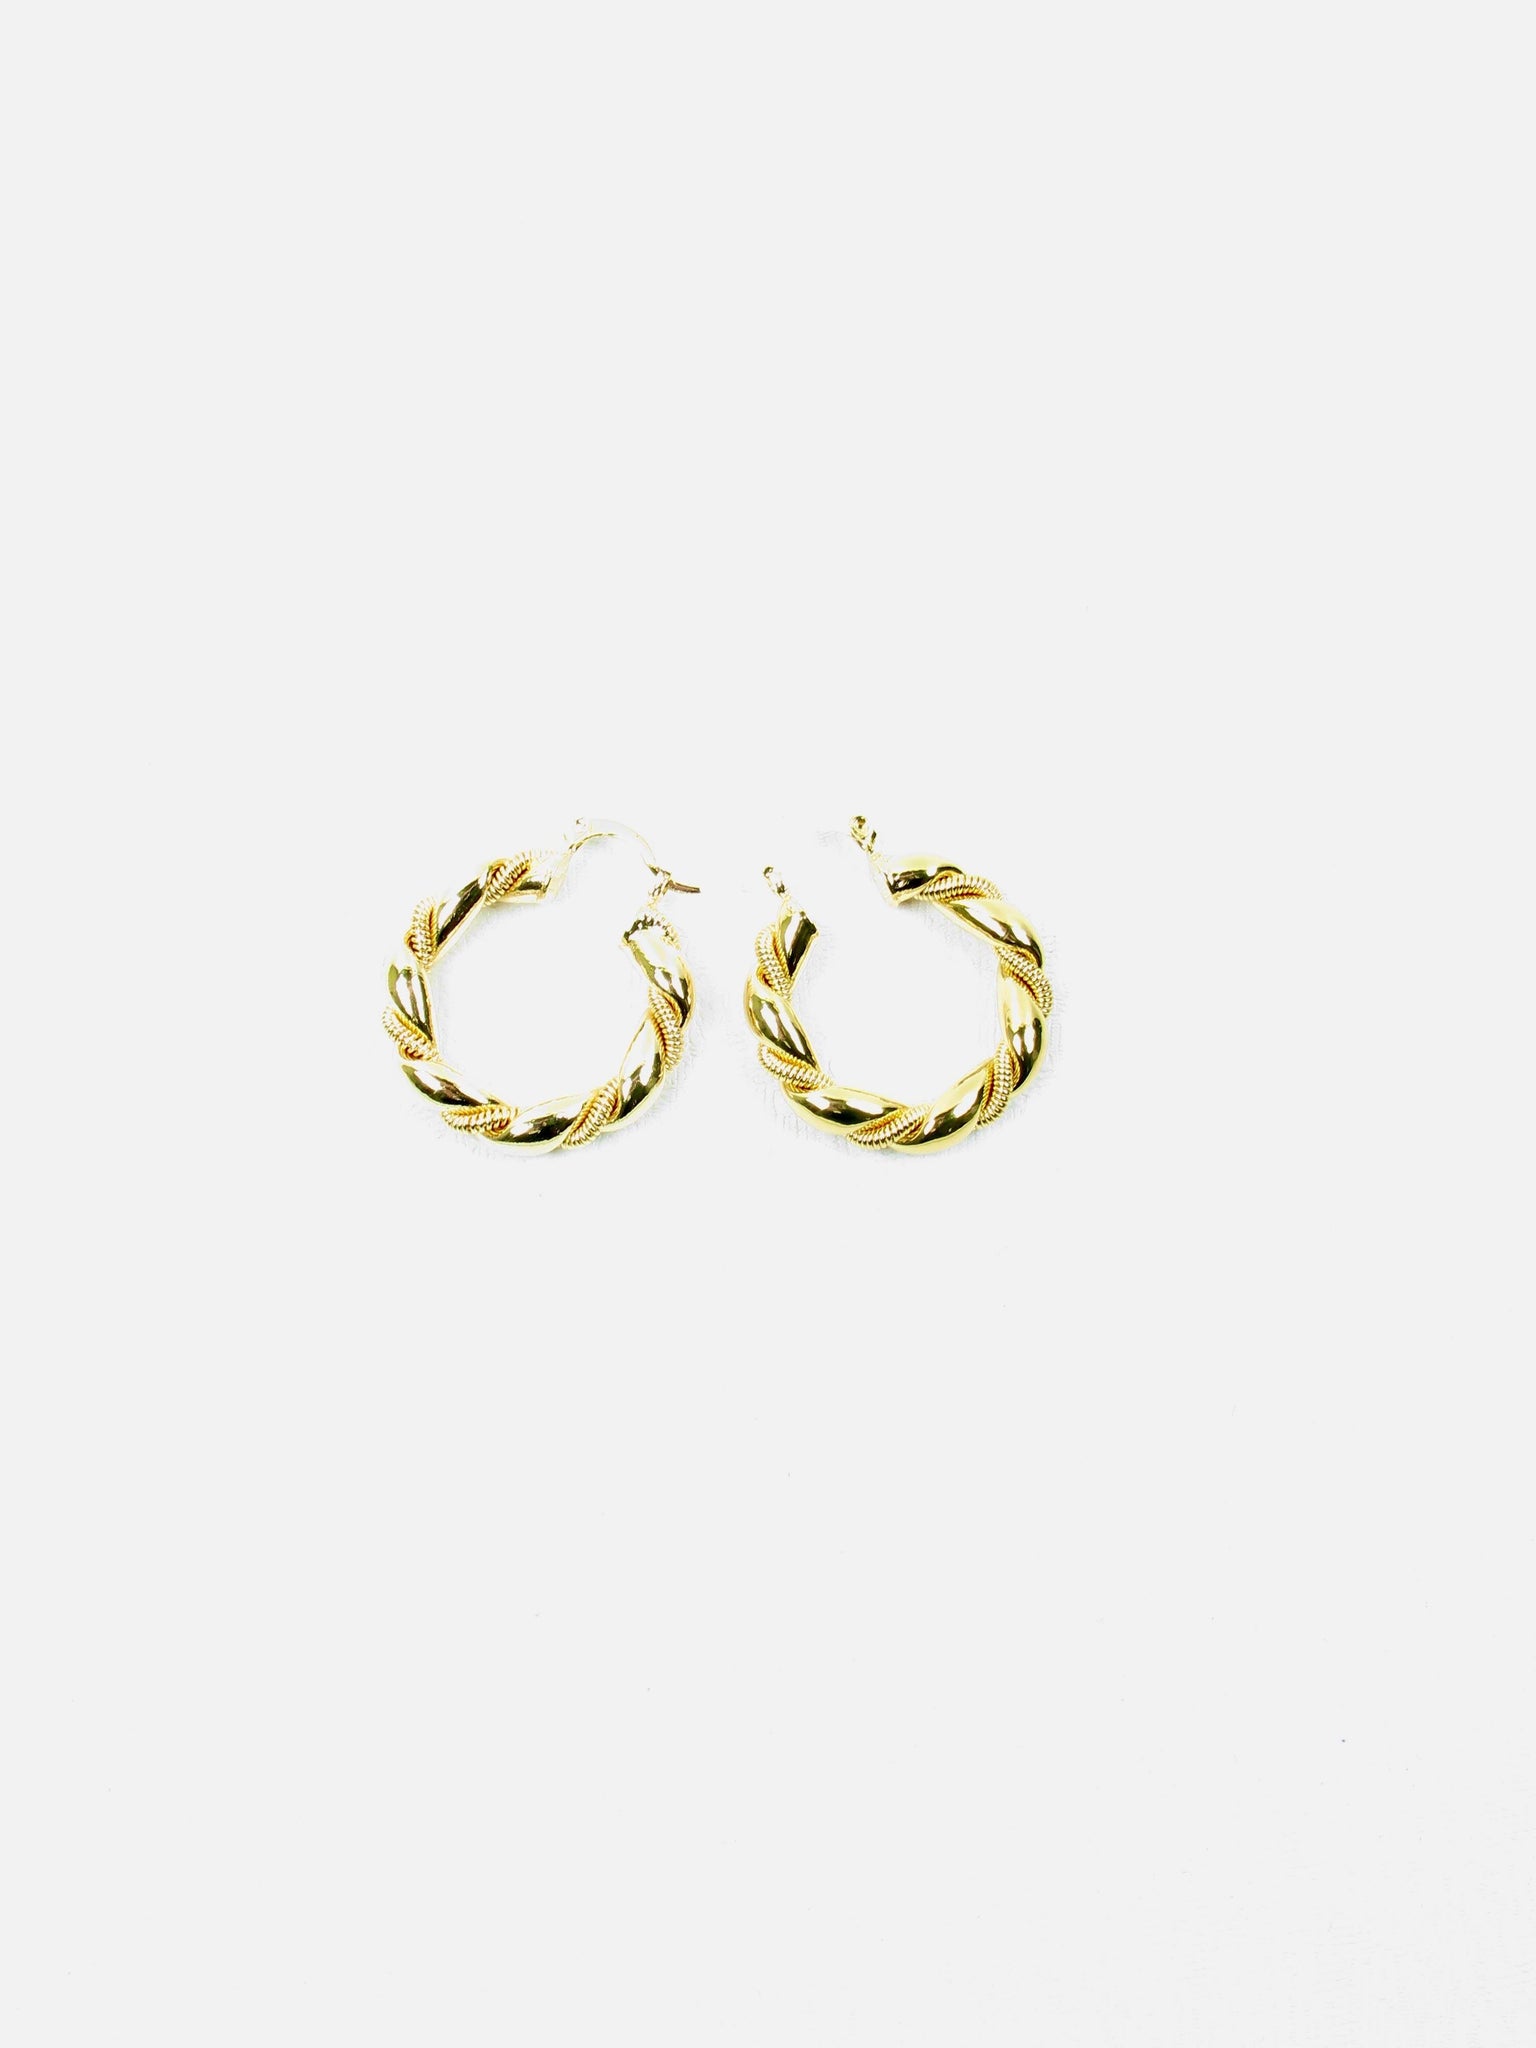 Vintage Style Gold Plated Twisted Hoop Earrings - The Harlequin